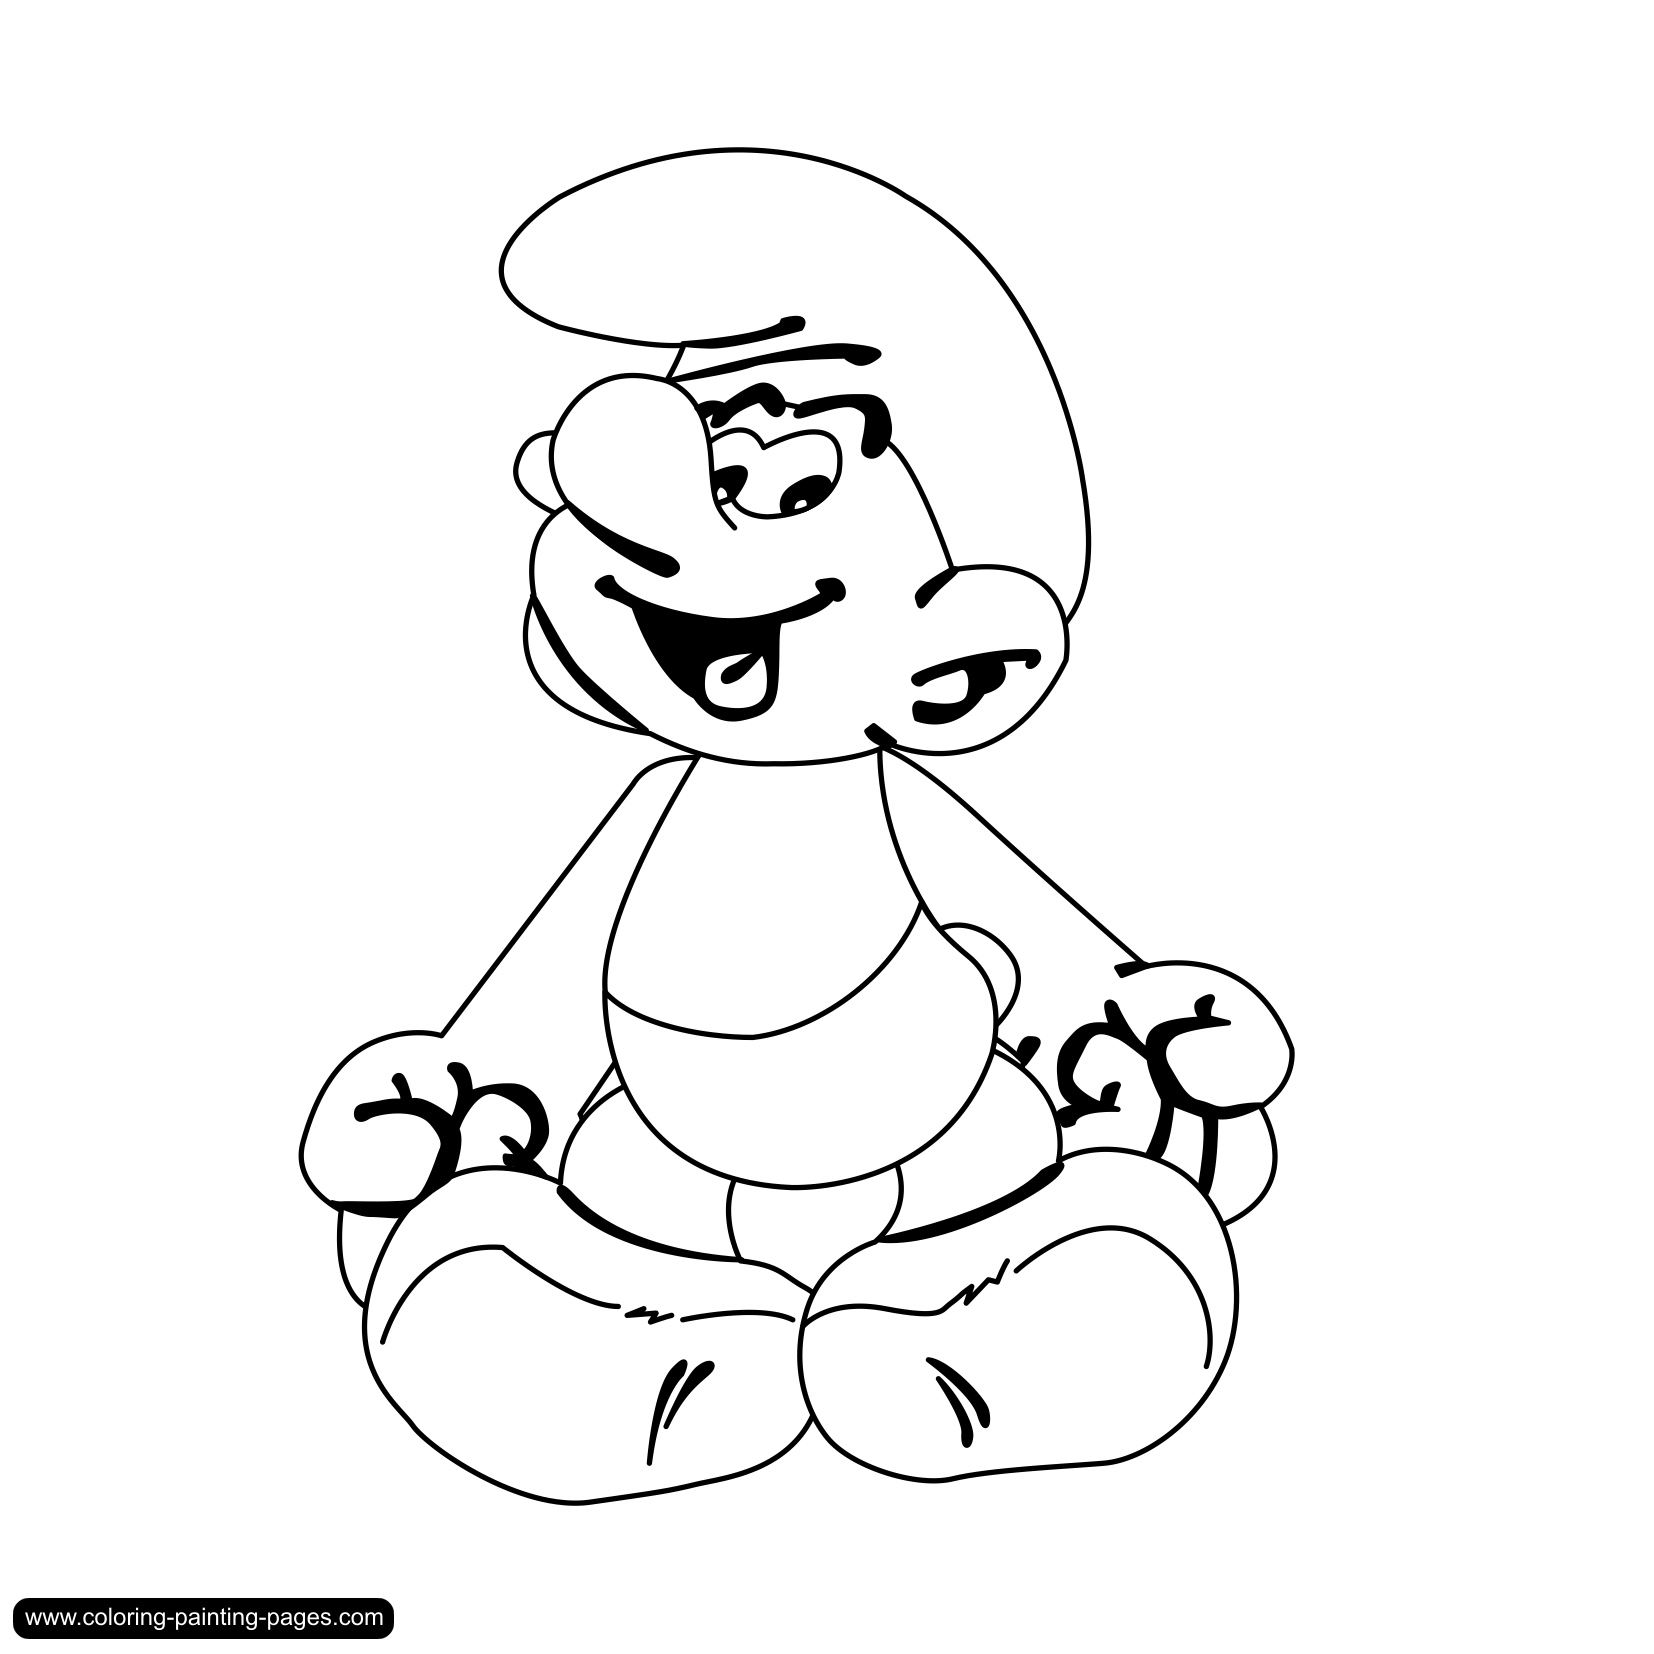 Coloring pages smurfs - free downloads